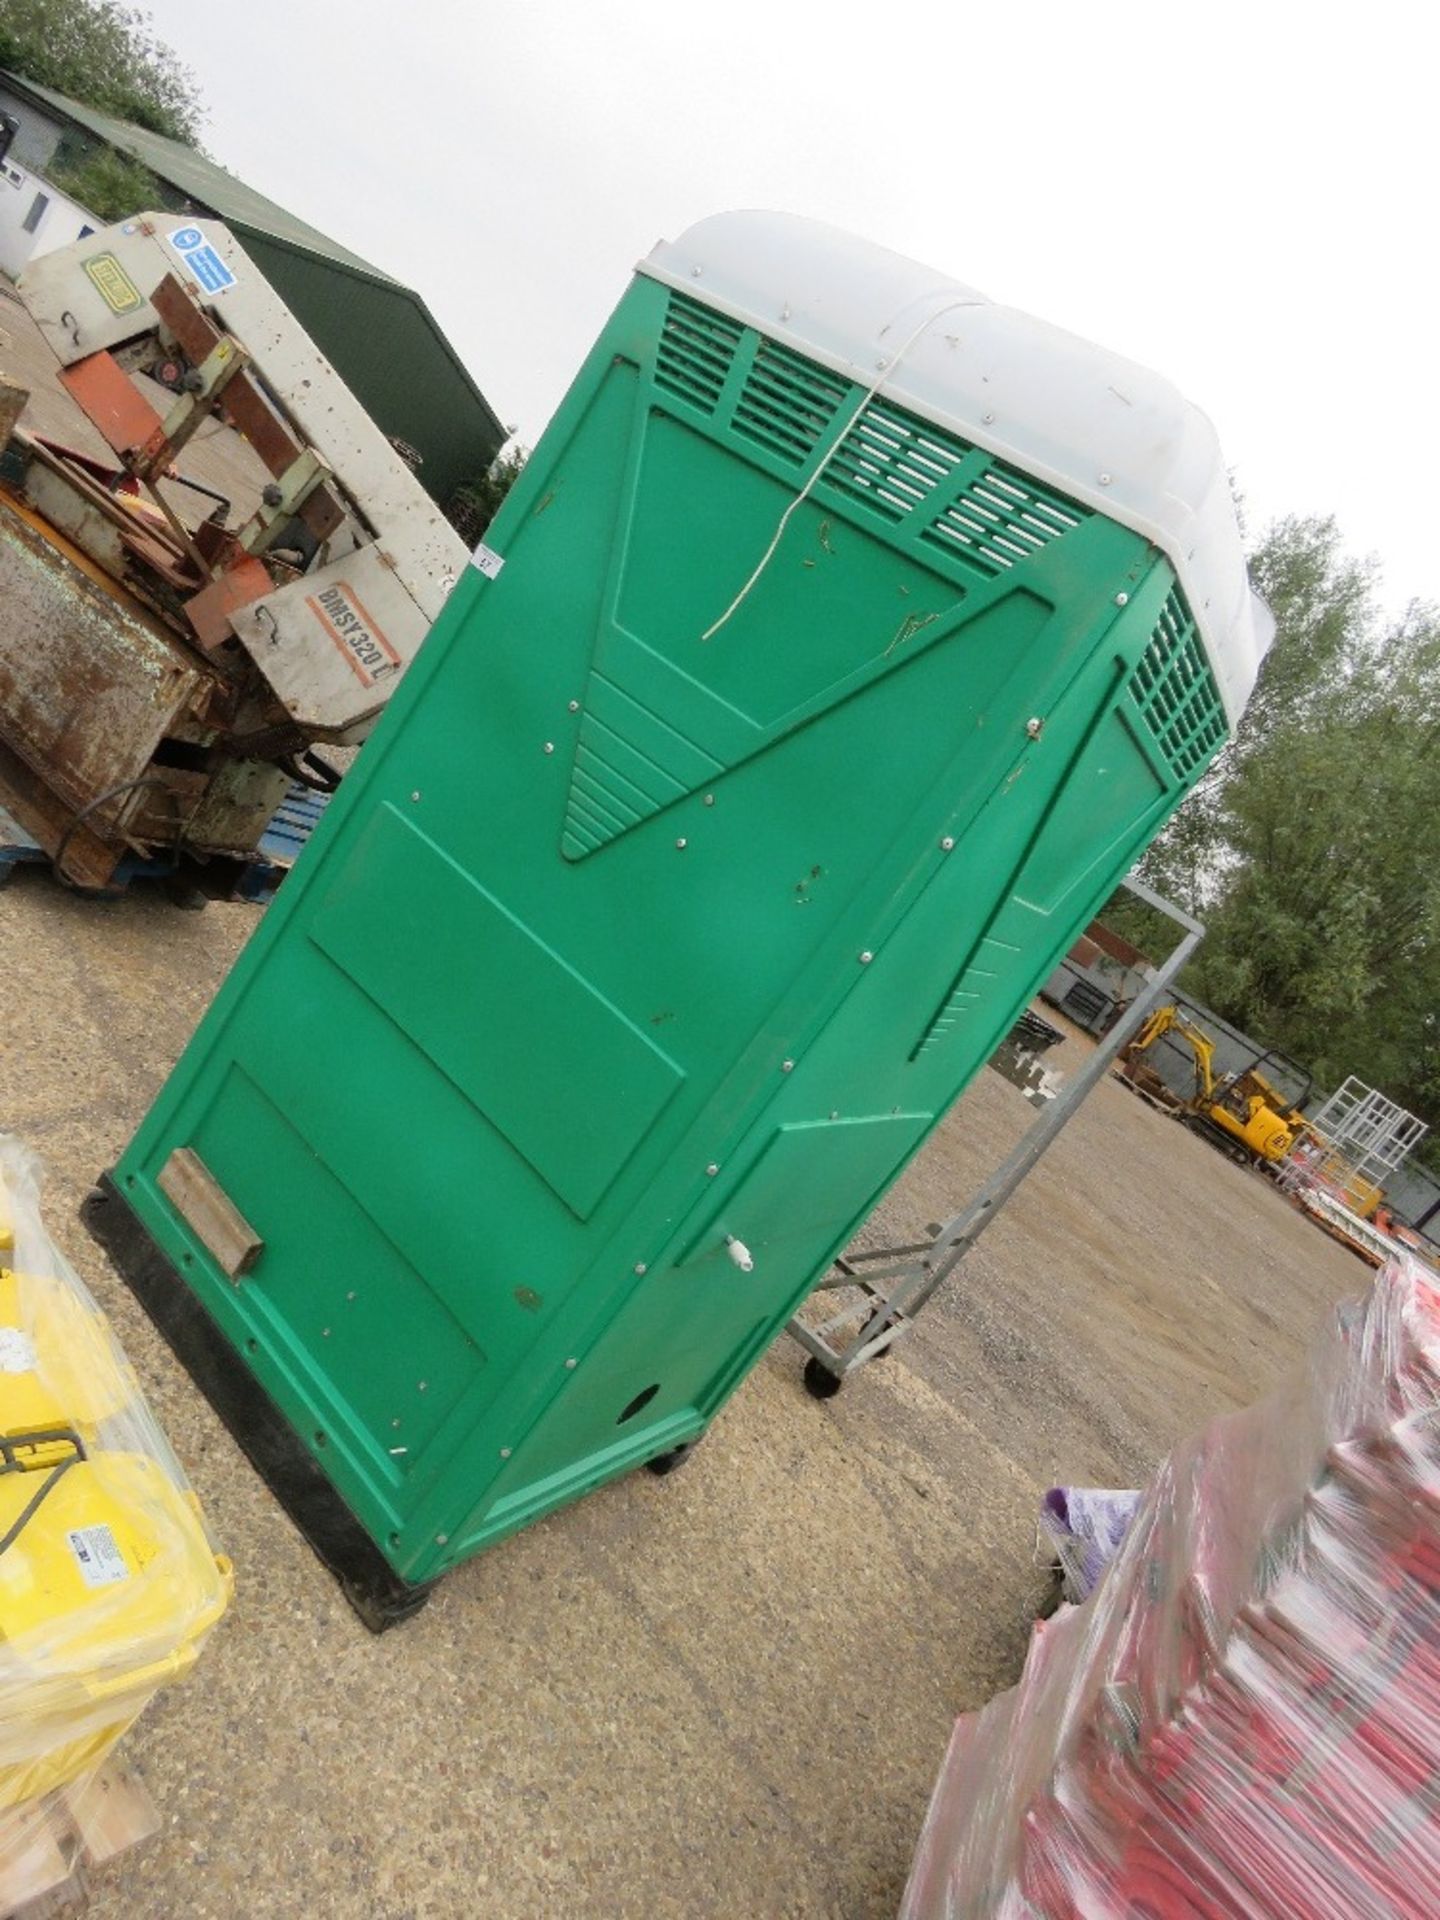 MAINS PORTABLE SITE TOILET. - Image 2 of 7